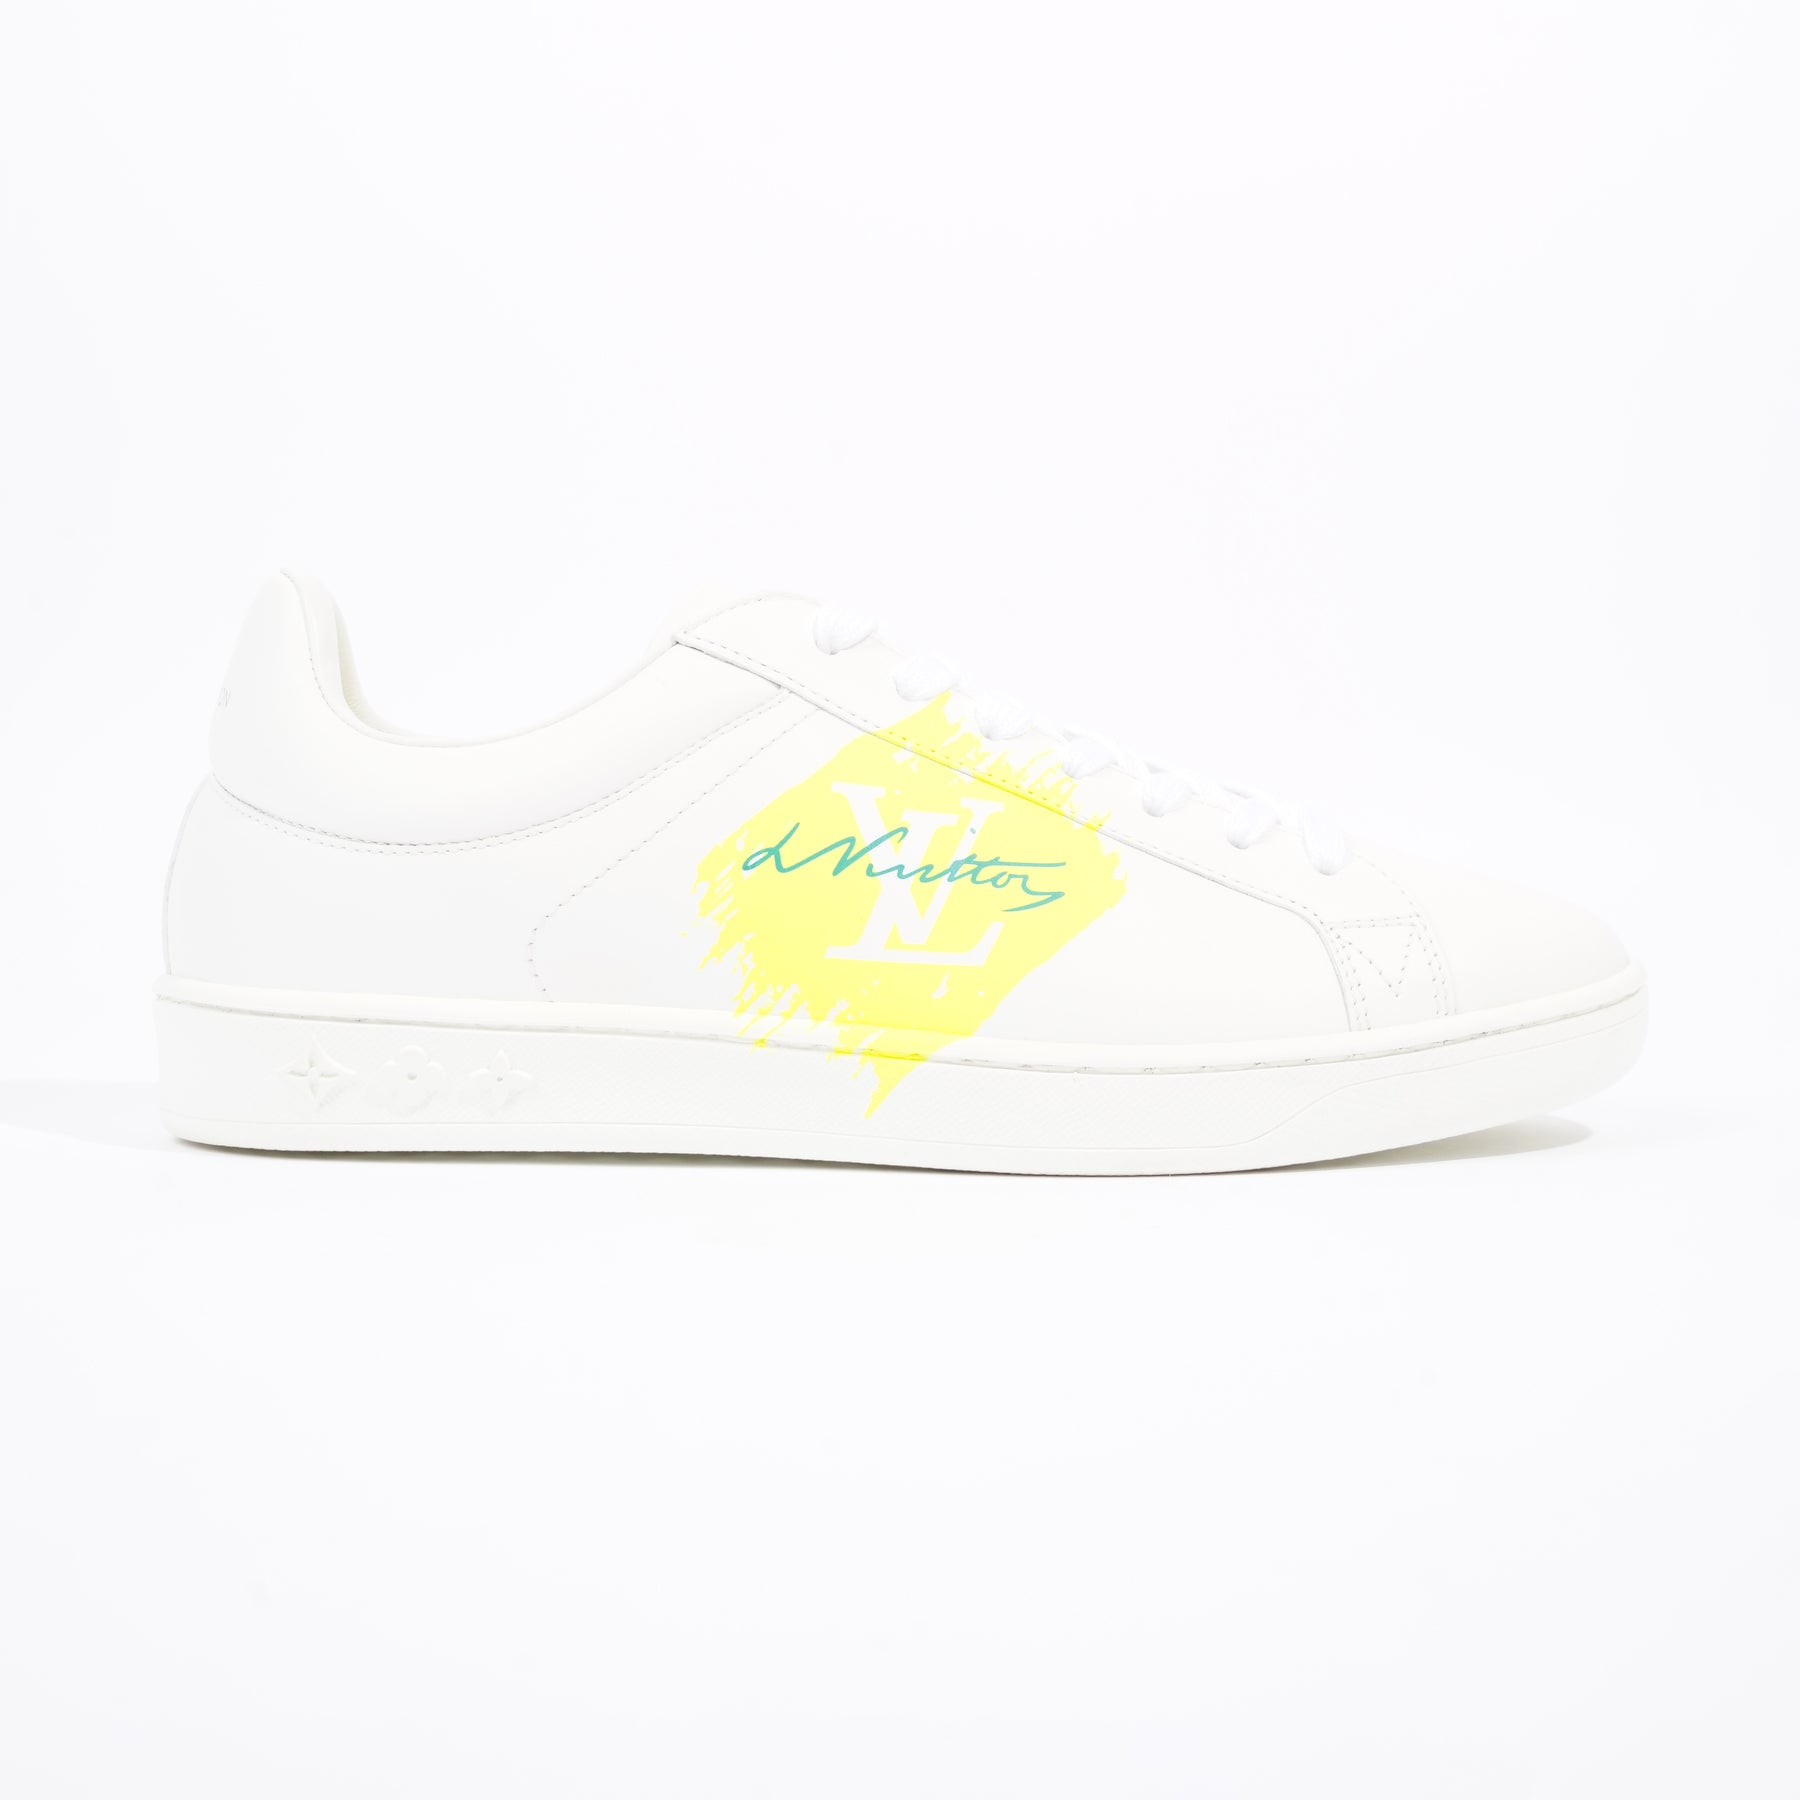 Louis Vuitton Luxembourg Sneakers UK 6.5 | 7.5